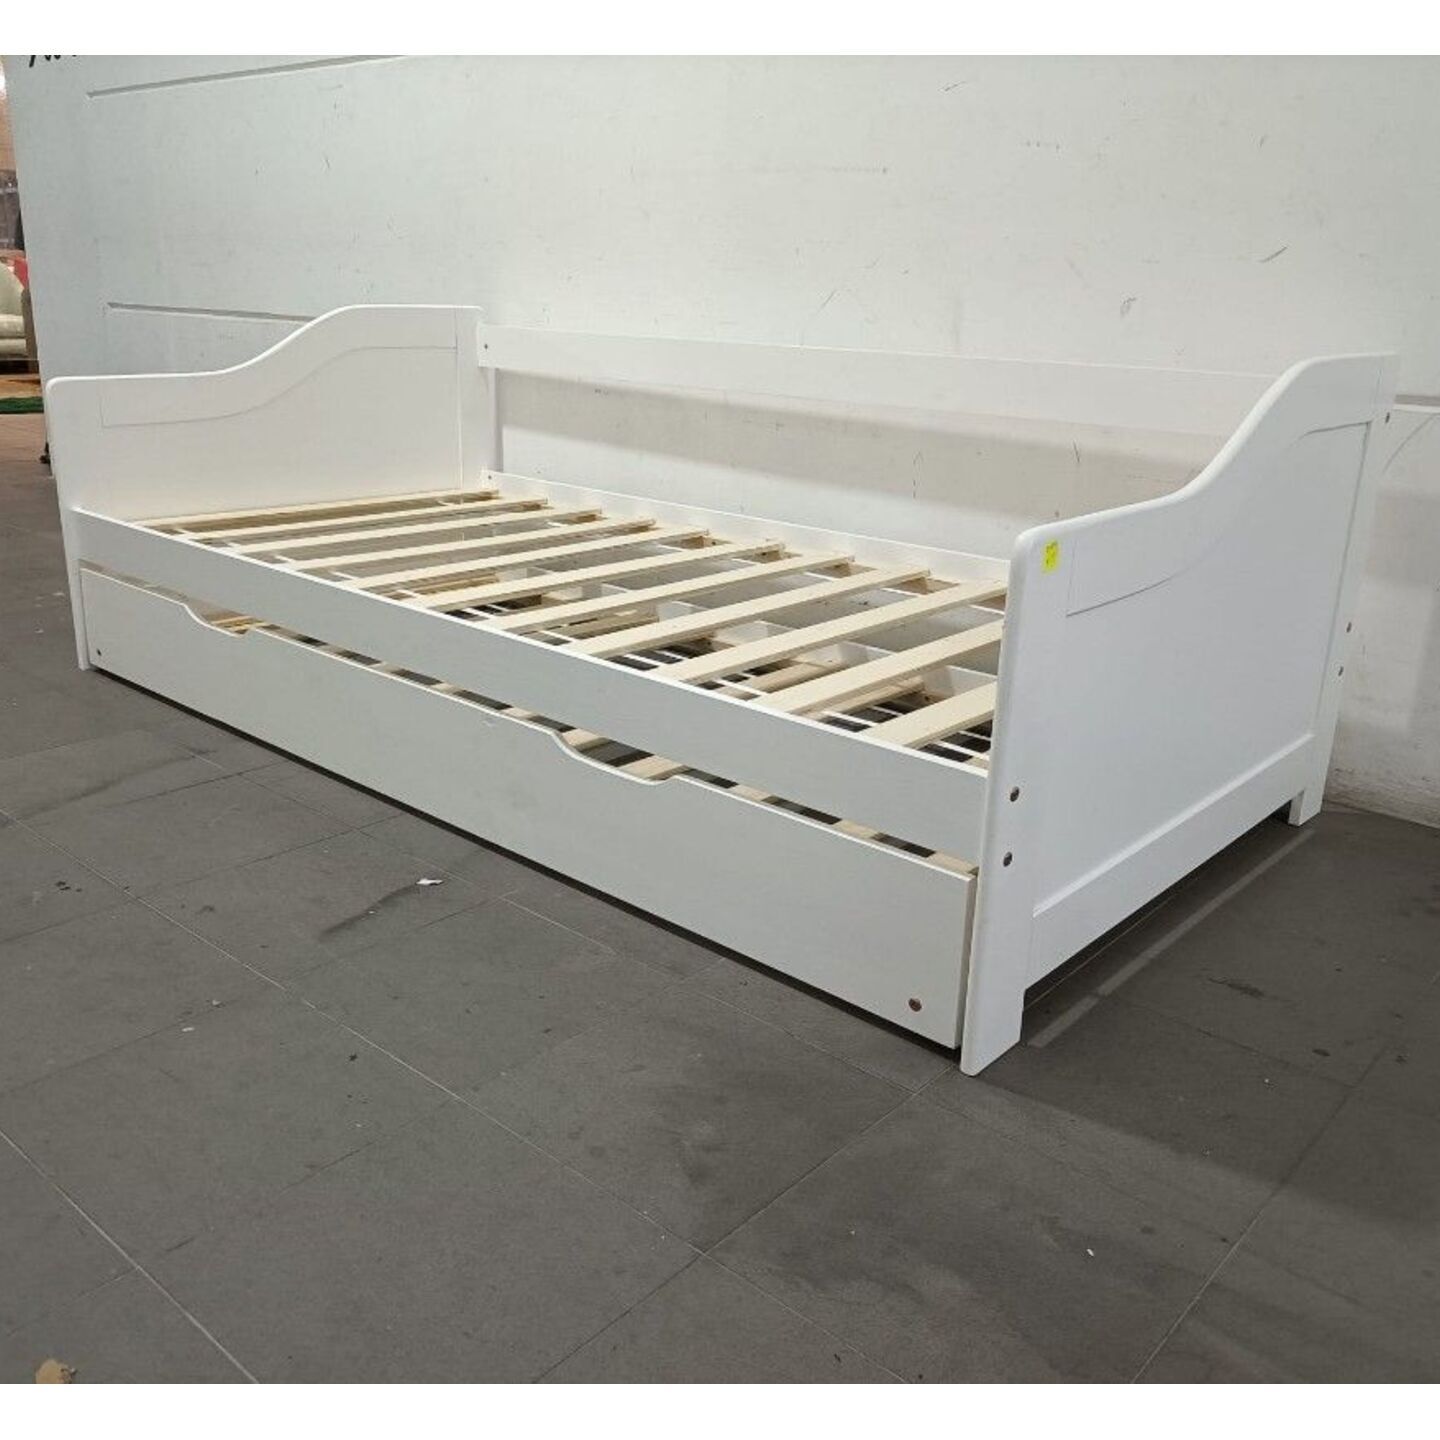 RUZENDA Single Size Wooden Day Bed in WHITE with Pull Out Trundle